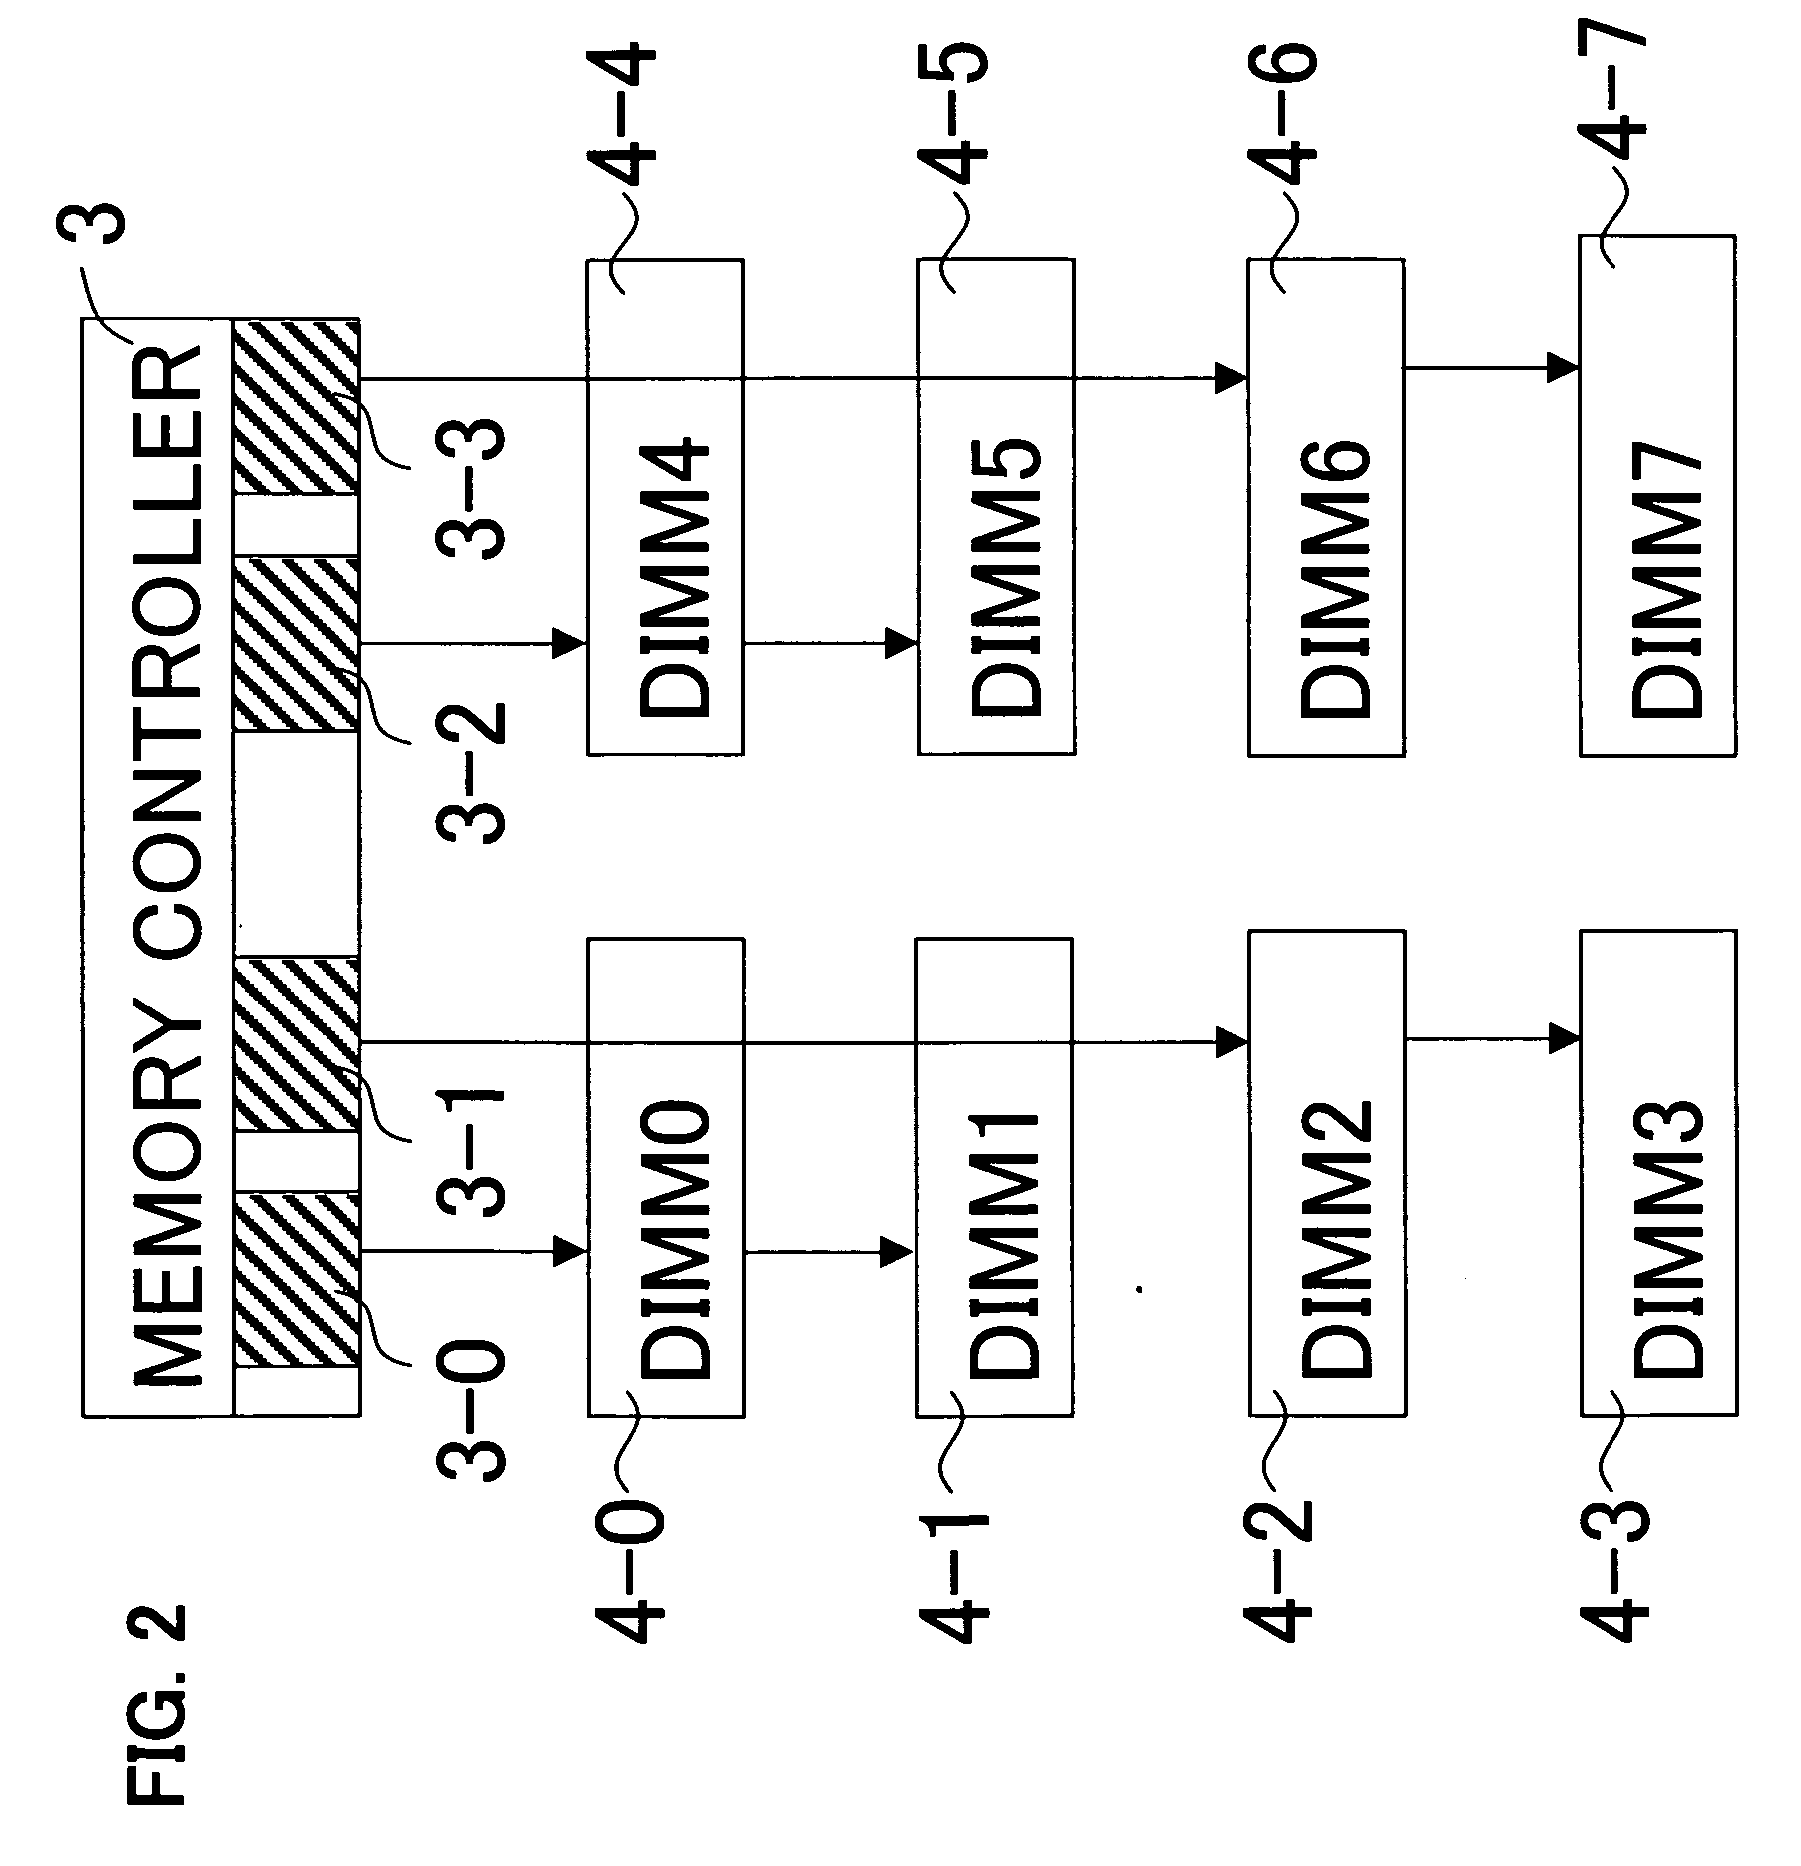 Synchronous data transfer circuit, computer system and memory system